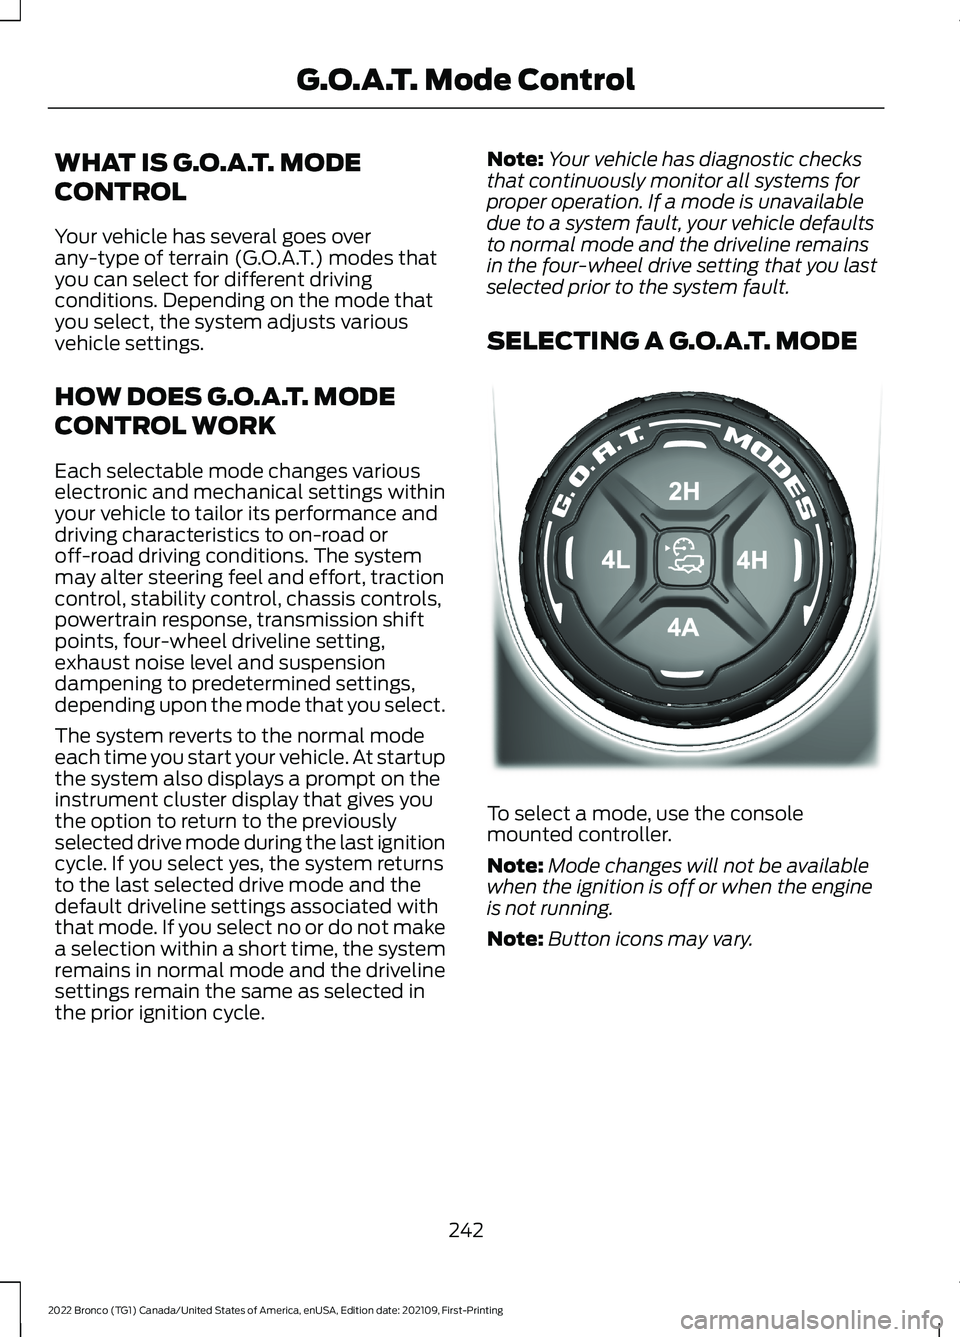 FORD BRONCO 2022 Owners Manual WHAT IS G.O.A.T. MODE
CONTROL
Your vehicle has several goes overany-type of terrain (G.O.A.T.) modes thatyou can select for different drivingconditions. Depending on the mode thatyou select, the syste